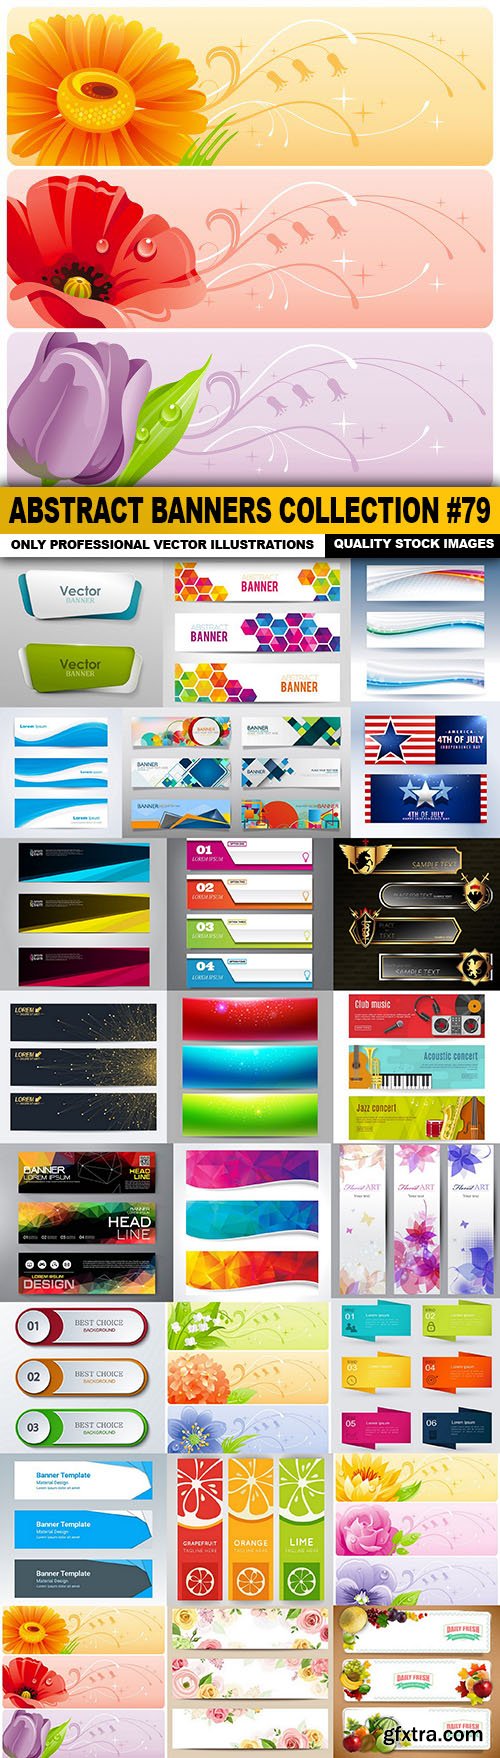 Abstract Banners Collection #79 - 25 Vectors